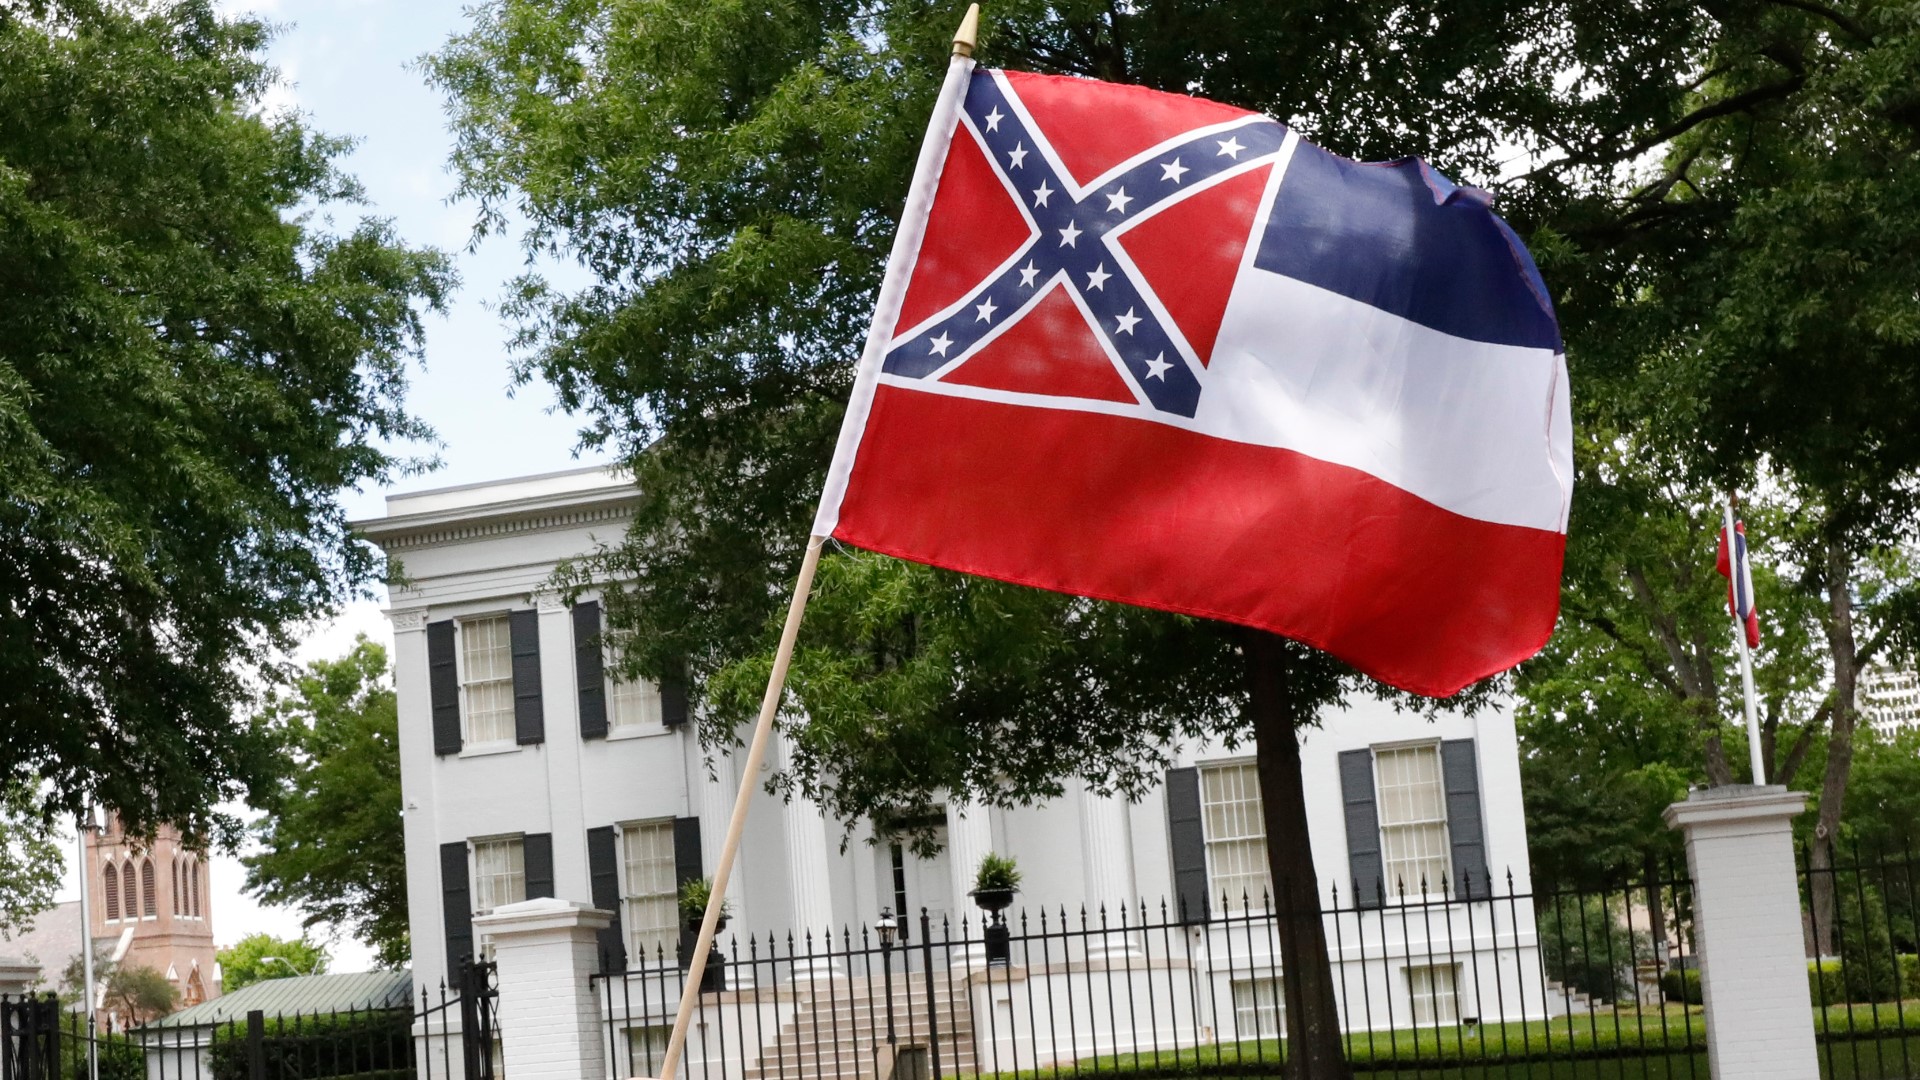 Tuesday, June 30, 2020: Mississippi Gov. Tate Reeves signed a landmark bill that retires the last state flag bearing the Confederate battle emblem.